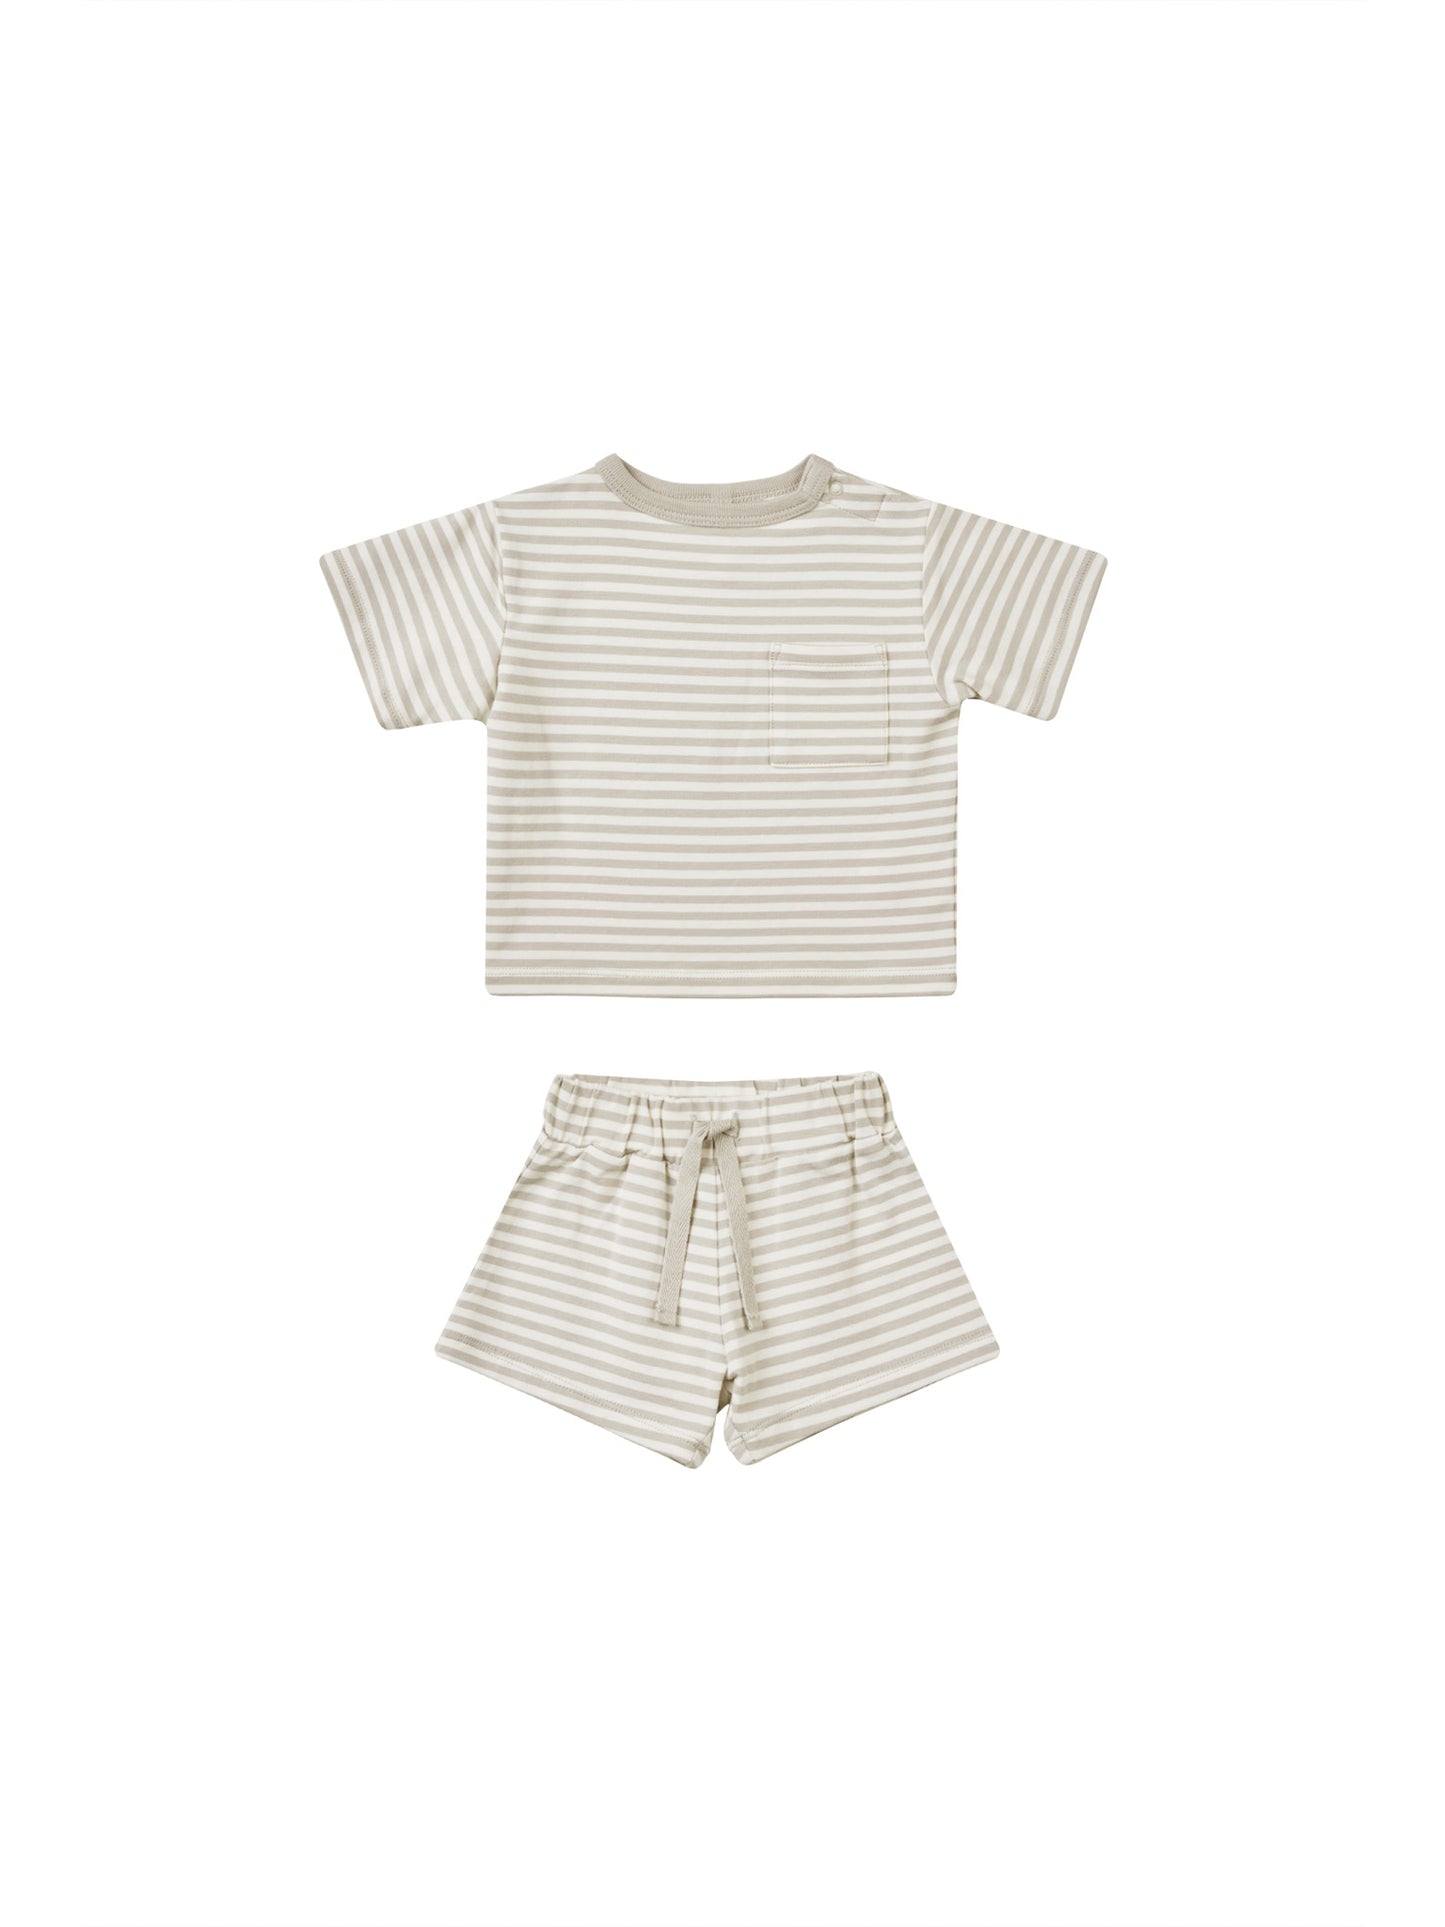 Quincy Mae SS24 Two Piece Sets